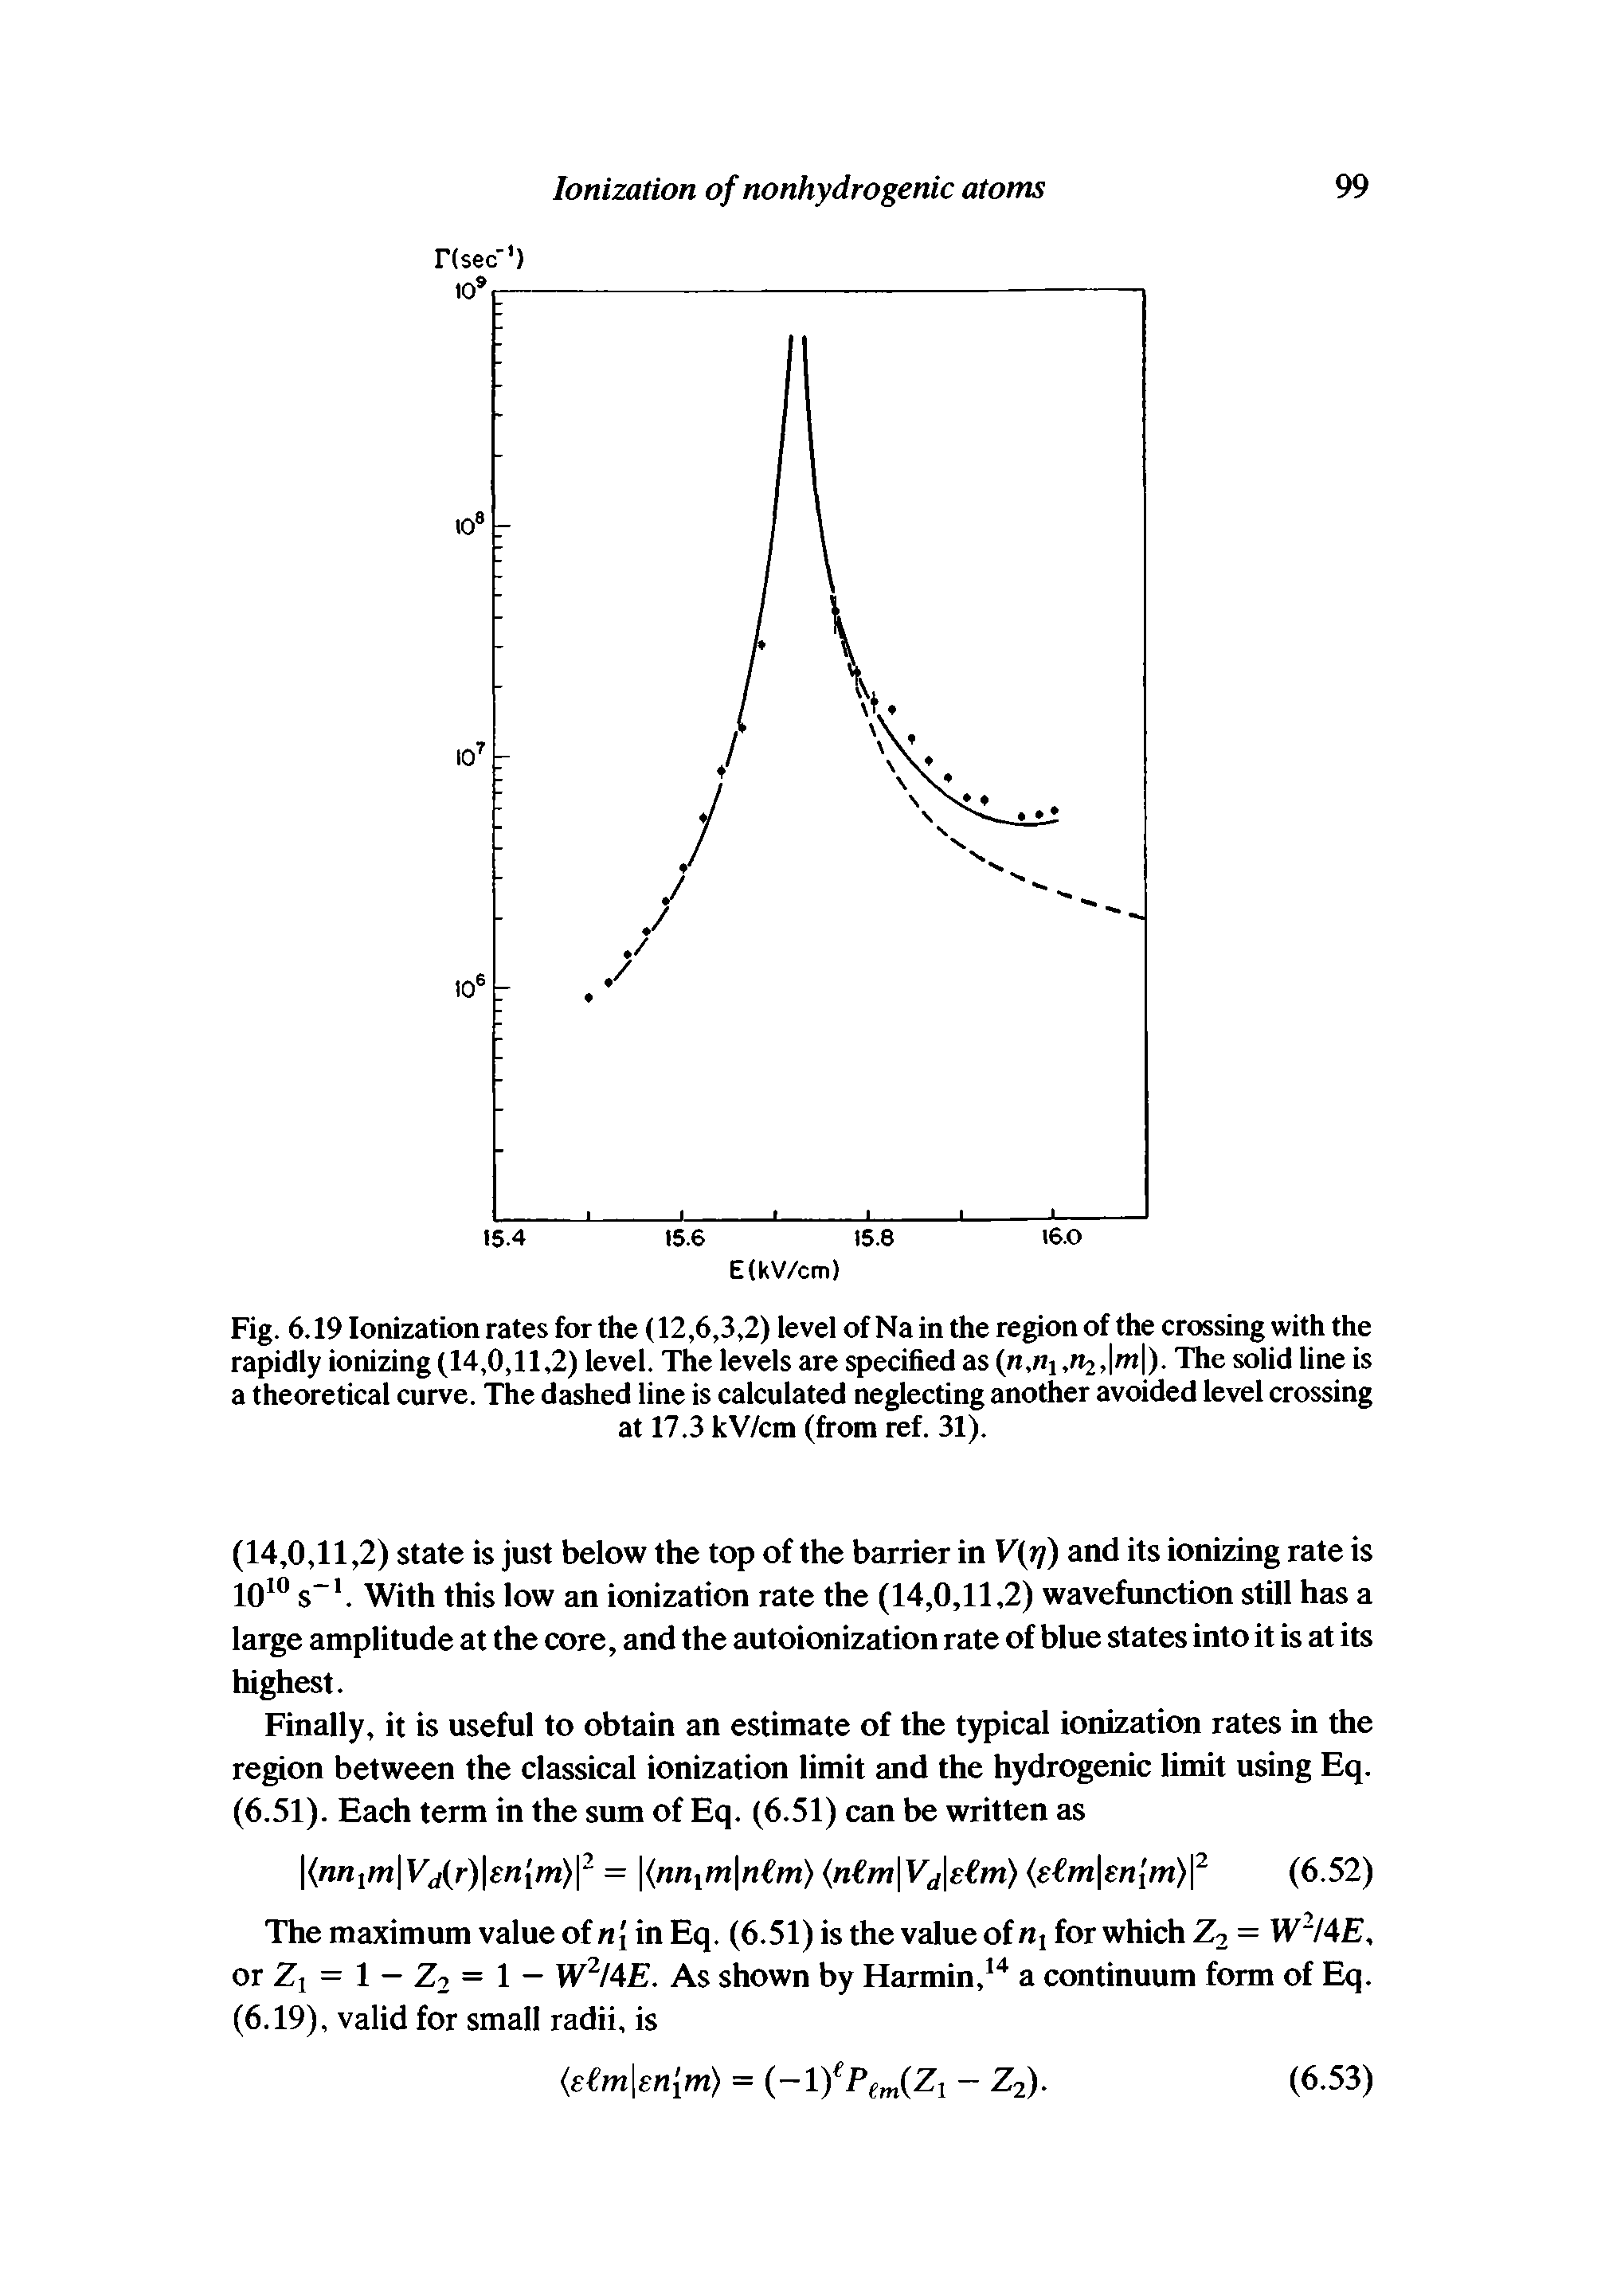 Fig. 6.19 Ionization rates for the (12,6,3,2) level of Na in the region of the crossing with the rapidly ionizing (14,0,11,2) level. The levels are specified as (n, i, 2>M). The solid line is a theoretical curve. The dashed line is calculated neglecting another avoided level crossing...